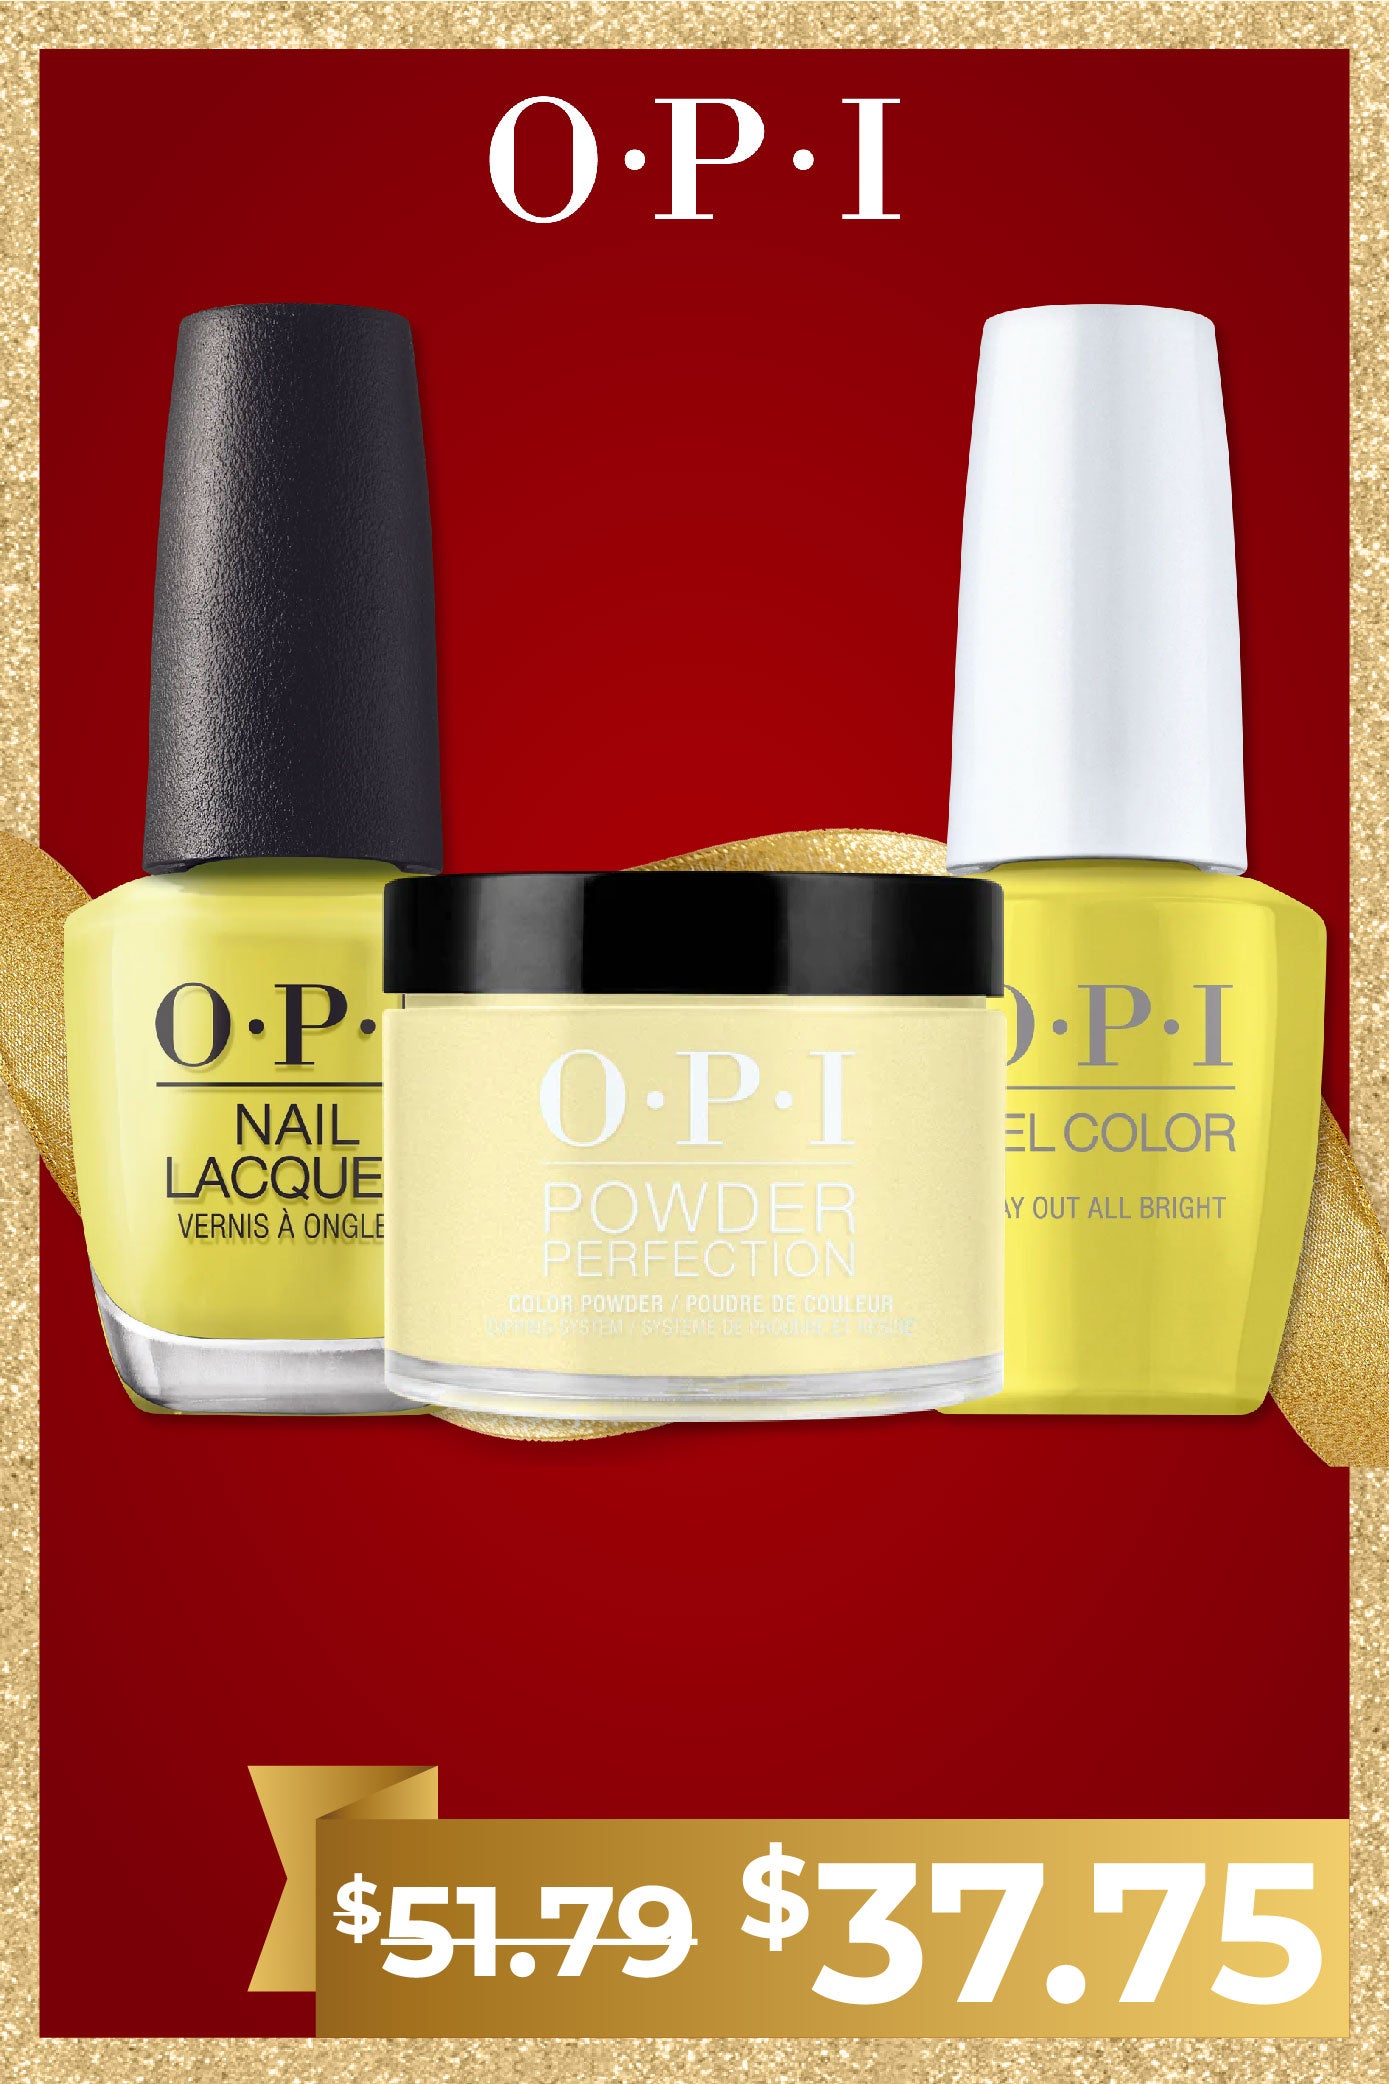 OPI 3-IN-1 COMBOS